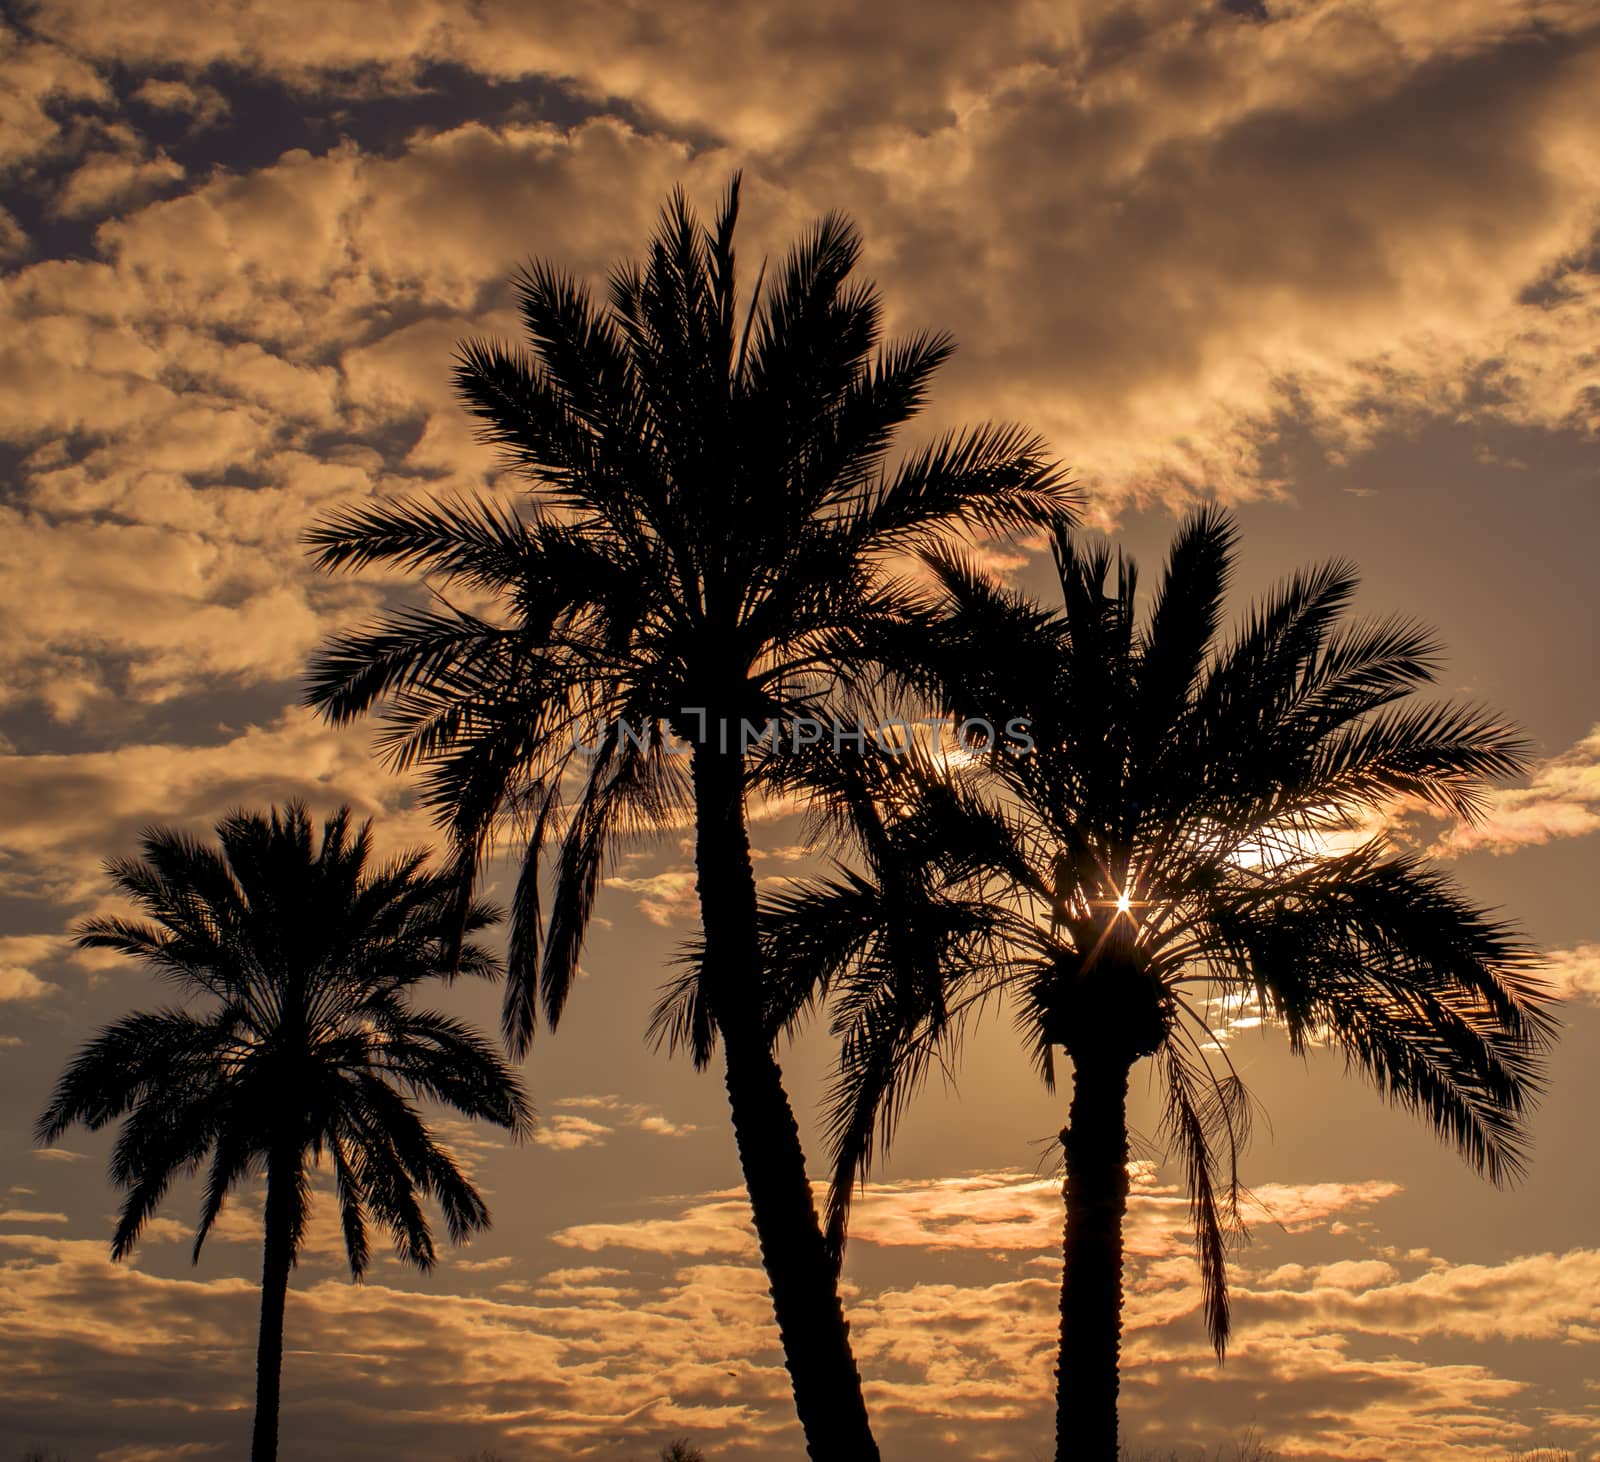 Palm trees background against warm summer evening sky by Paulmatthewphoto